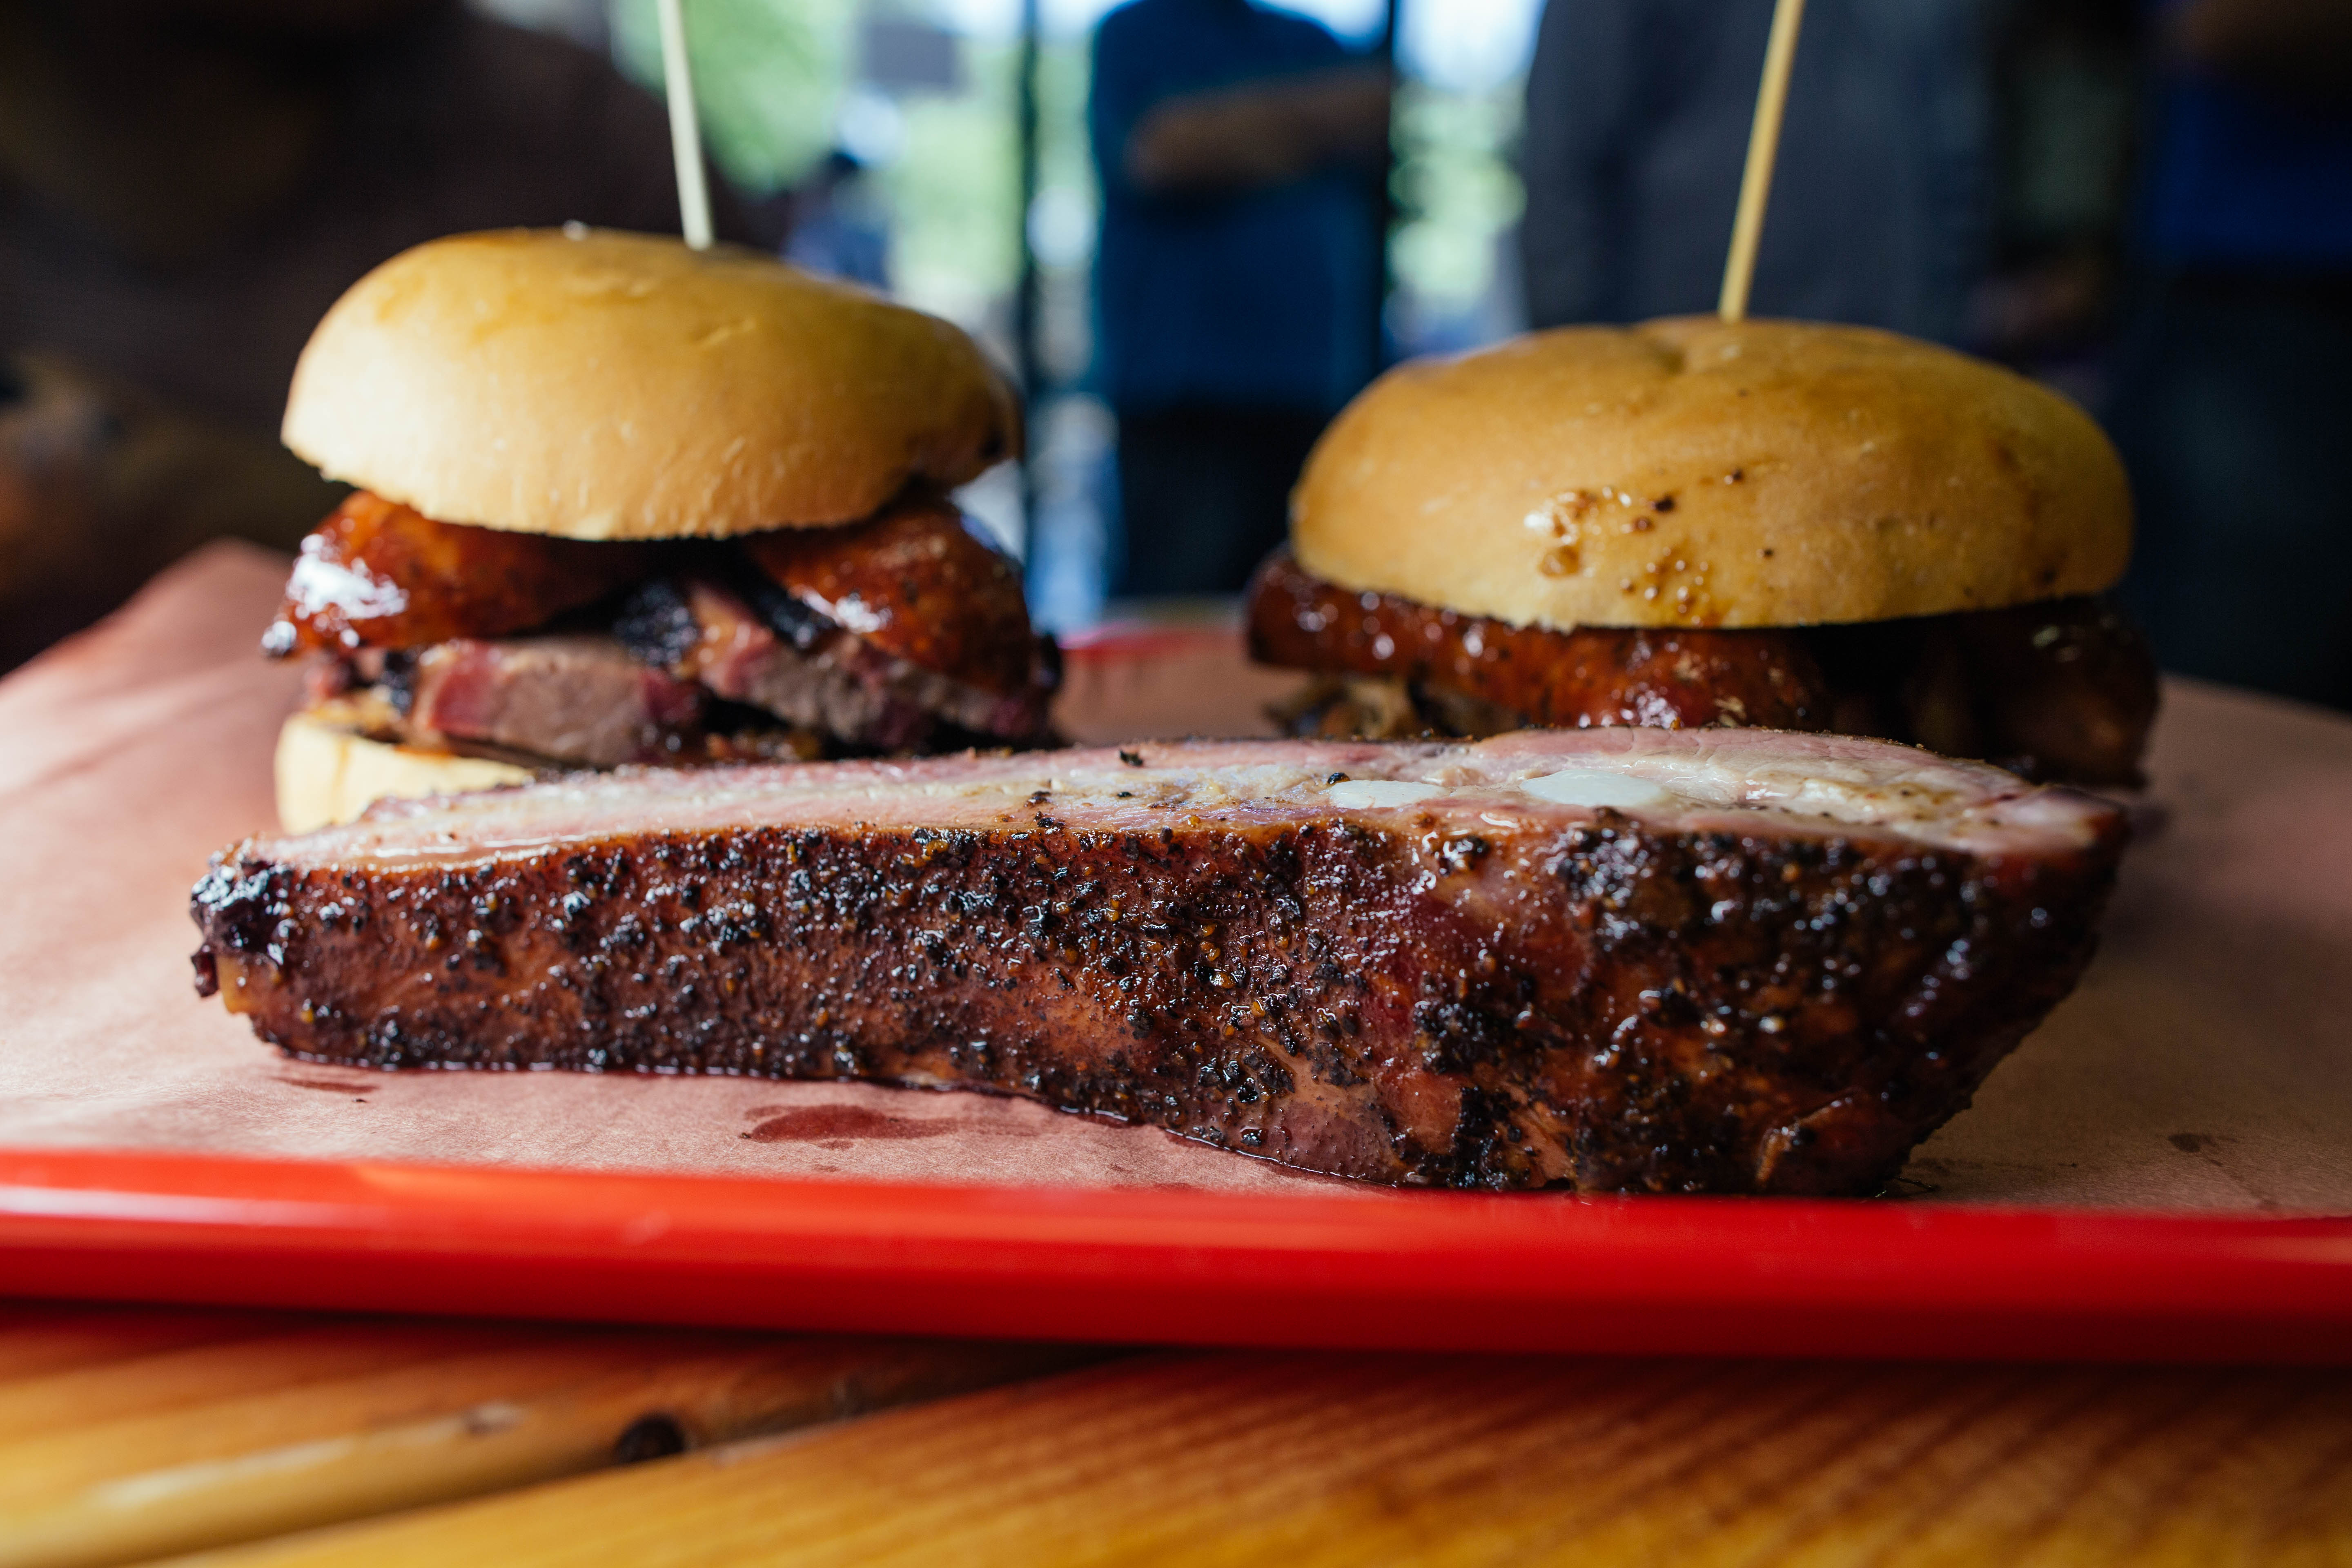 Chef-approved ribs and brisket sandwiches await